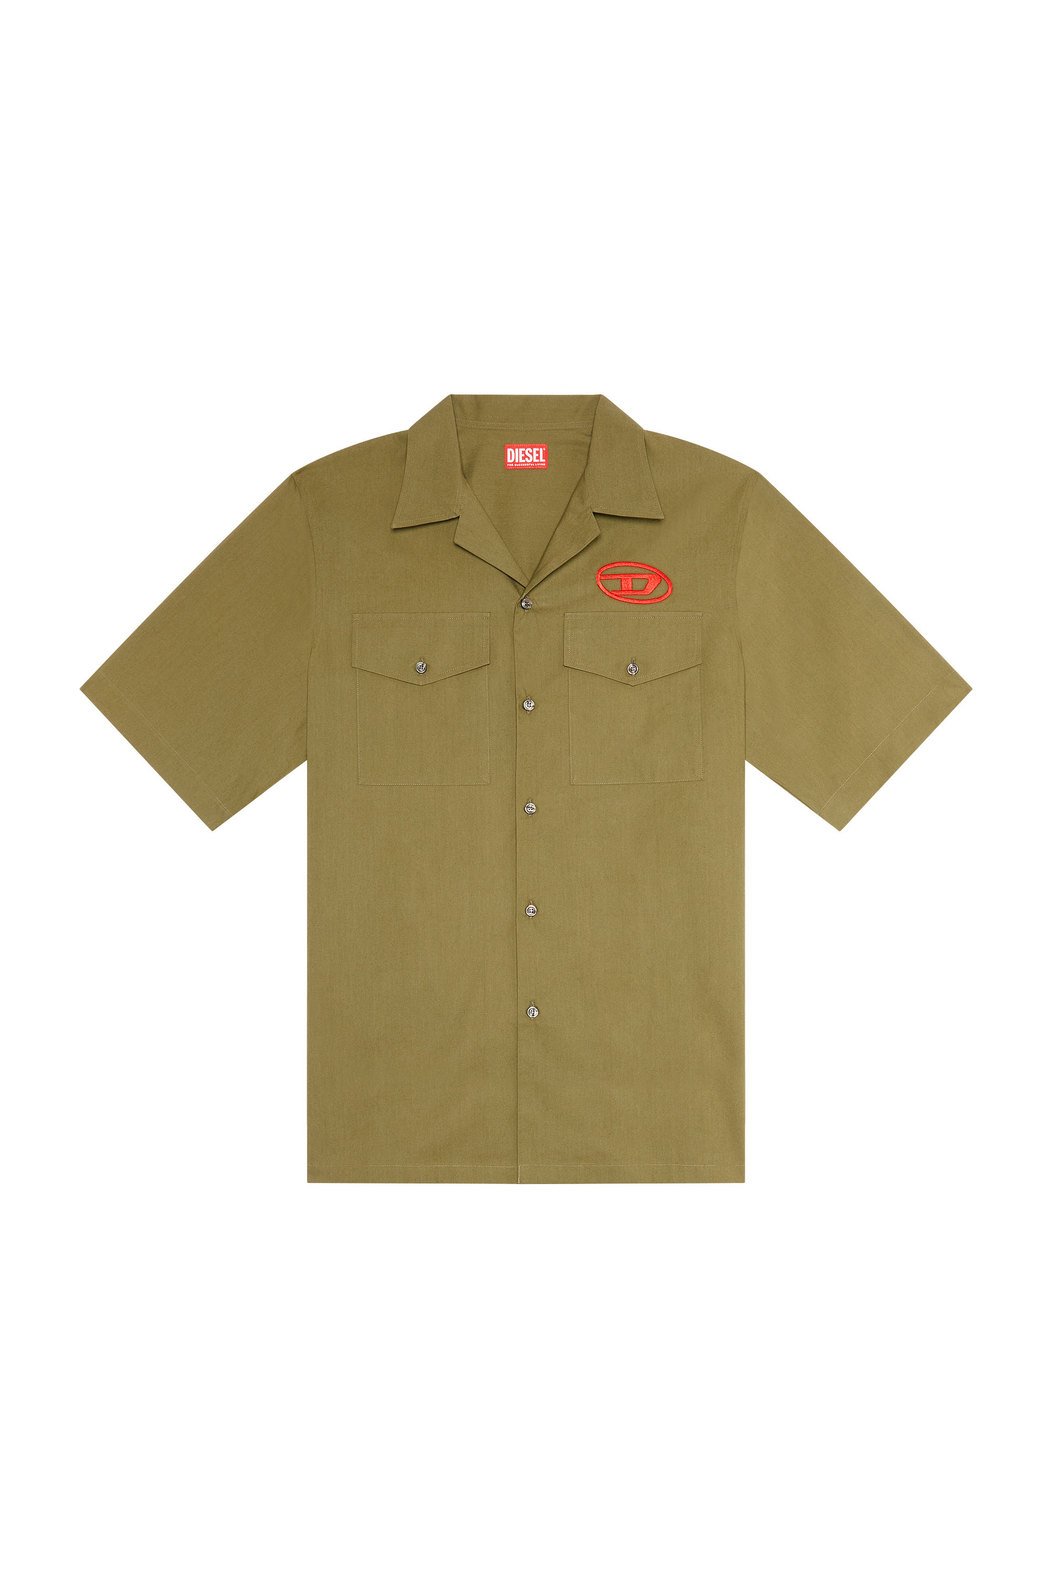 Bowling shirt with embroidered logo